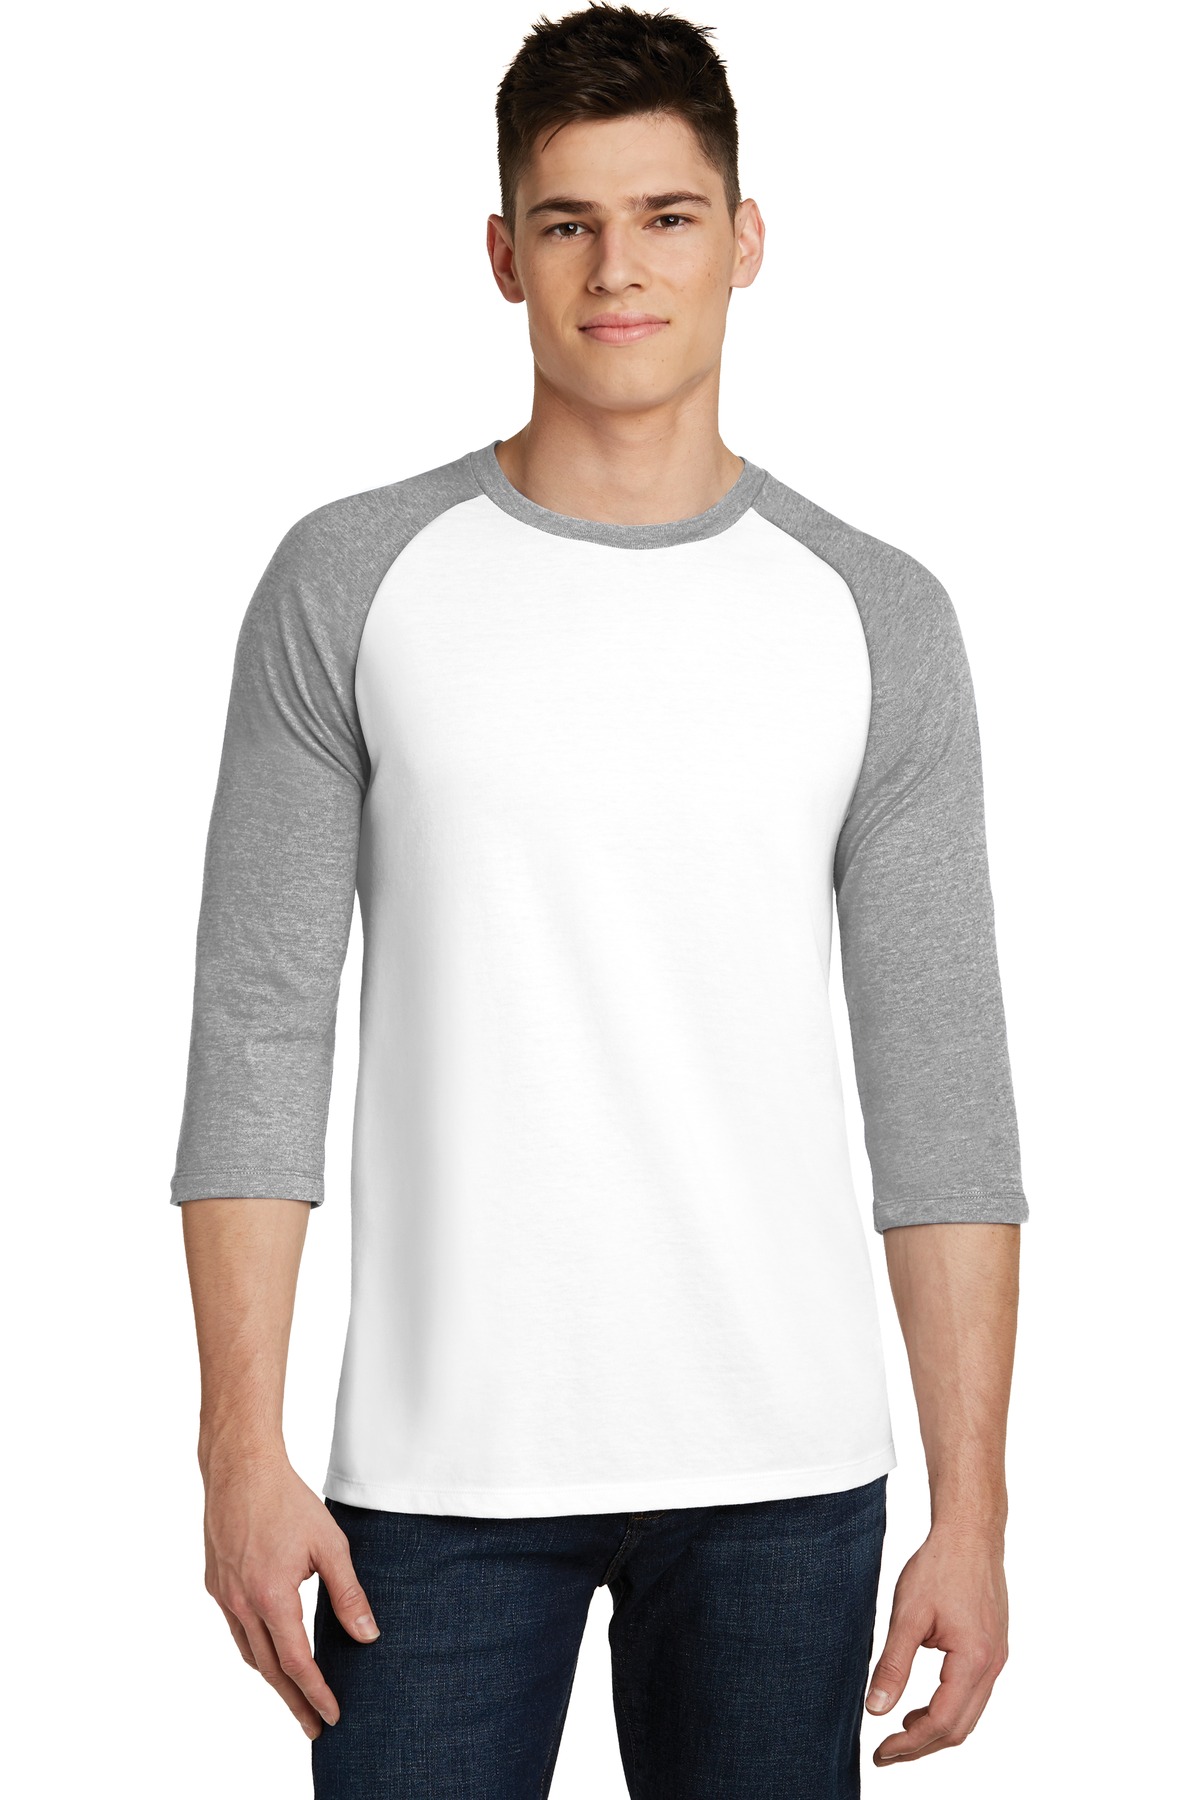 District Hospitality T-Shirts ® Very Important Tee® 3/4-Sleeve Raglan.-District